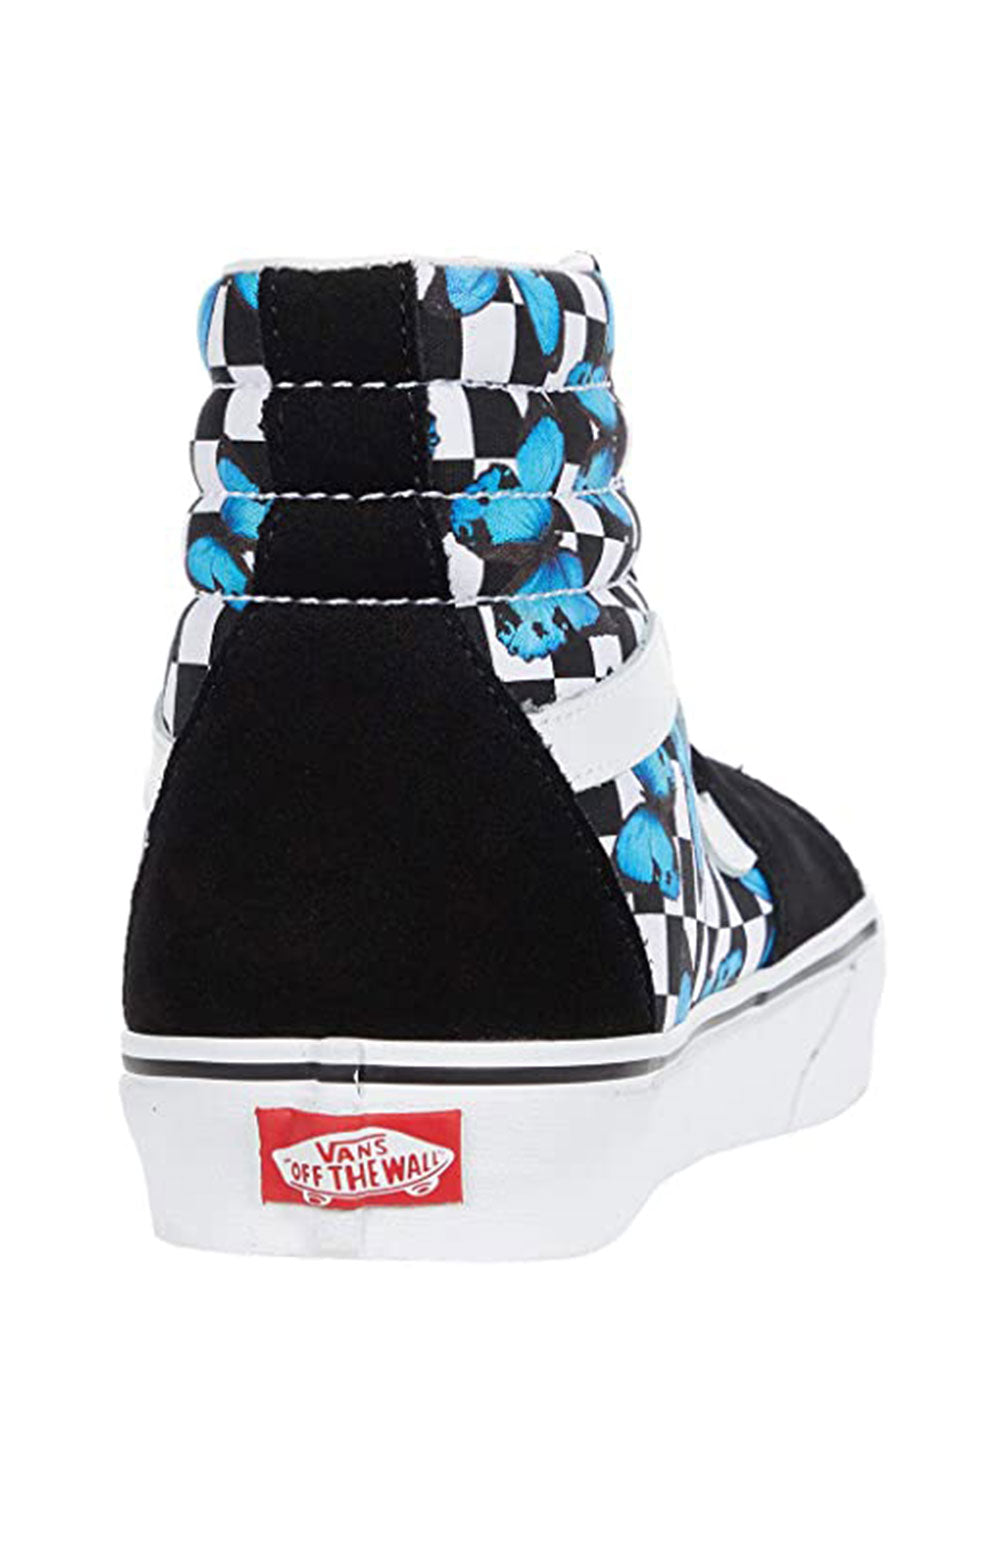 (HXV5KK) Butterfly Checkerboard Sk8-Hi Shoes